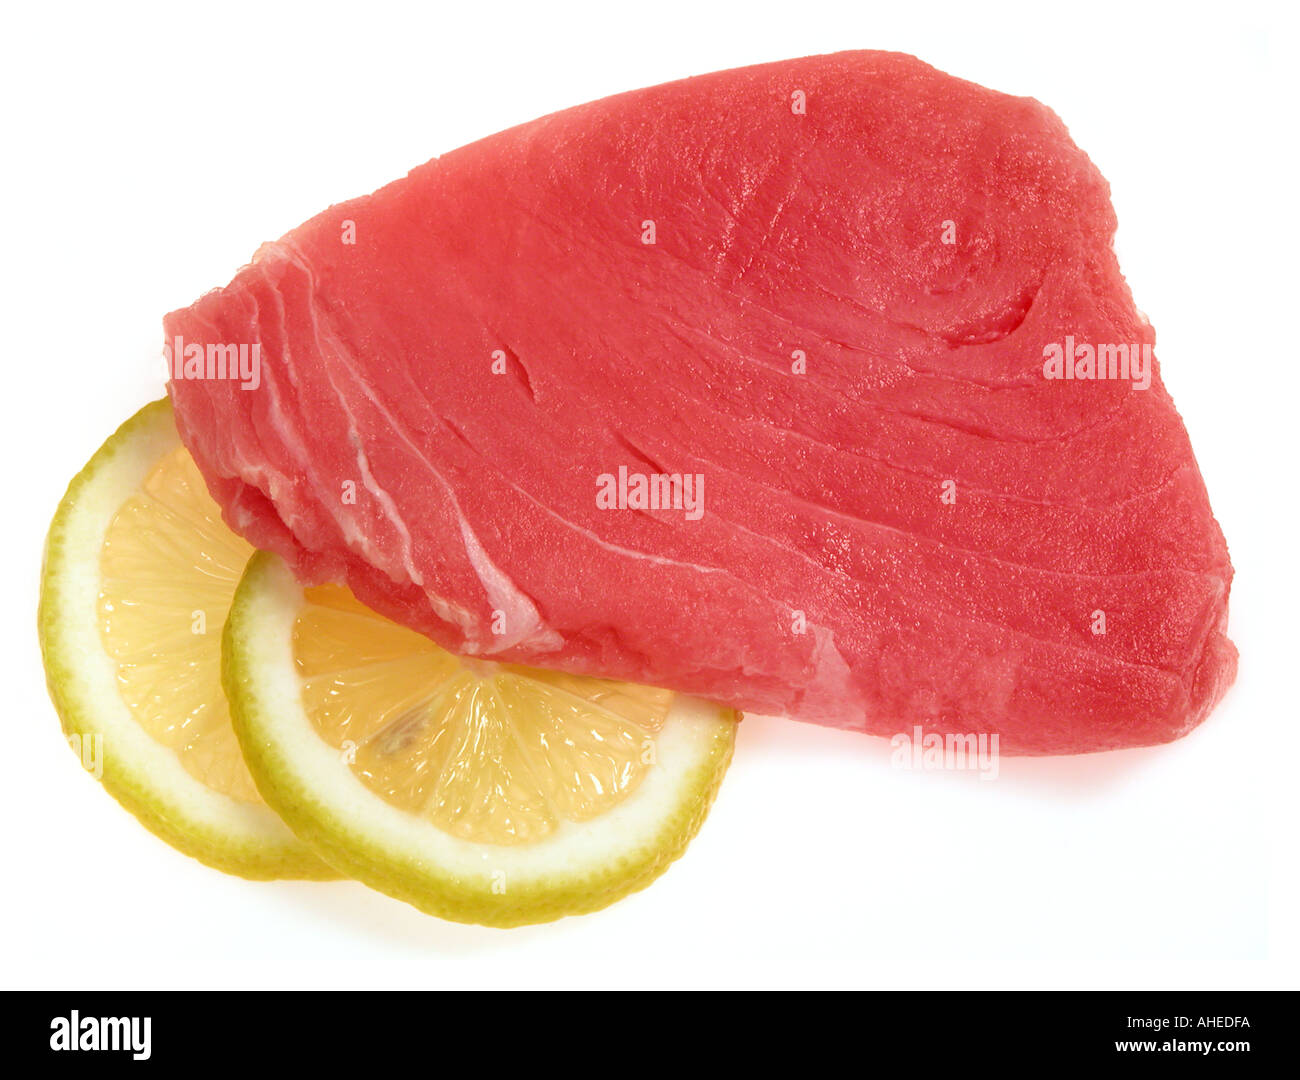 TUNA steak of Thunfisch tunafish fillets sushi quality lemon lime slices asia cooking Stock Photo